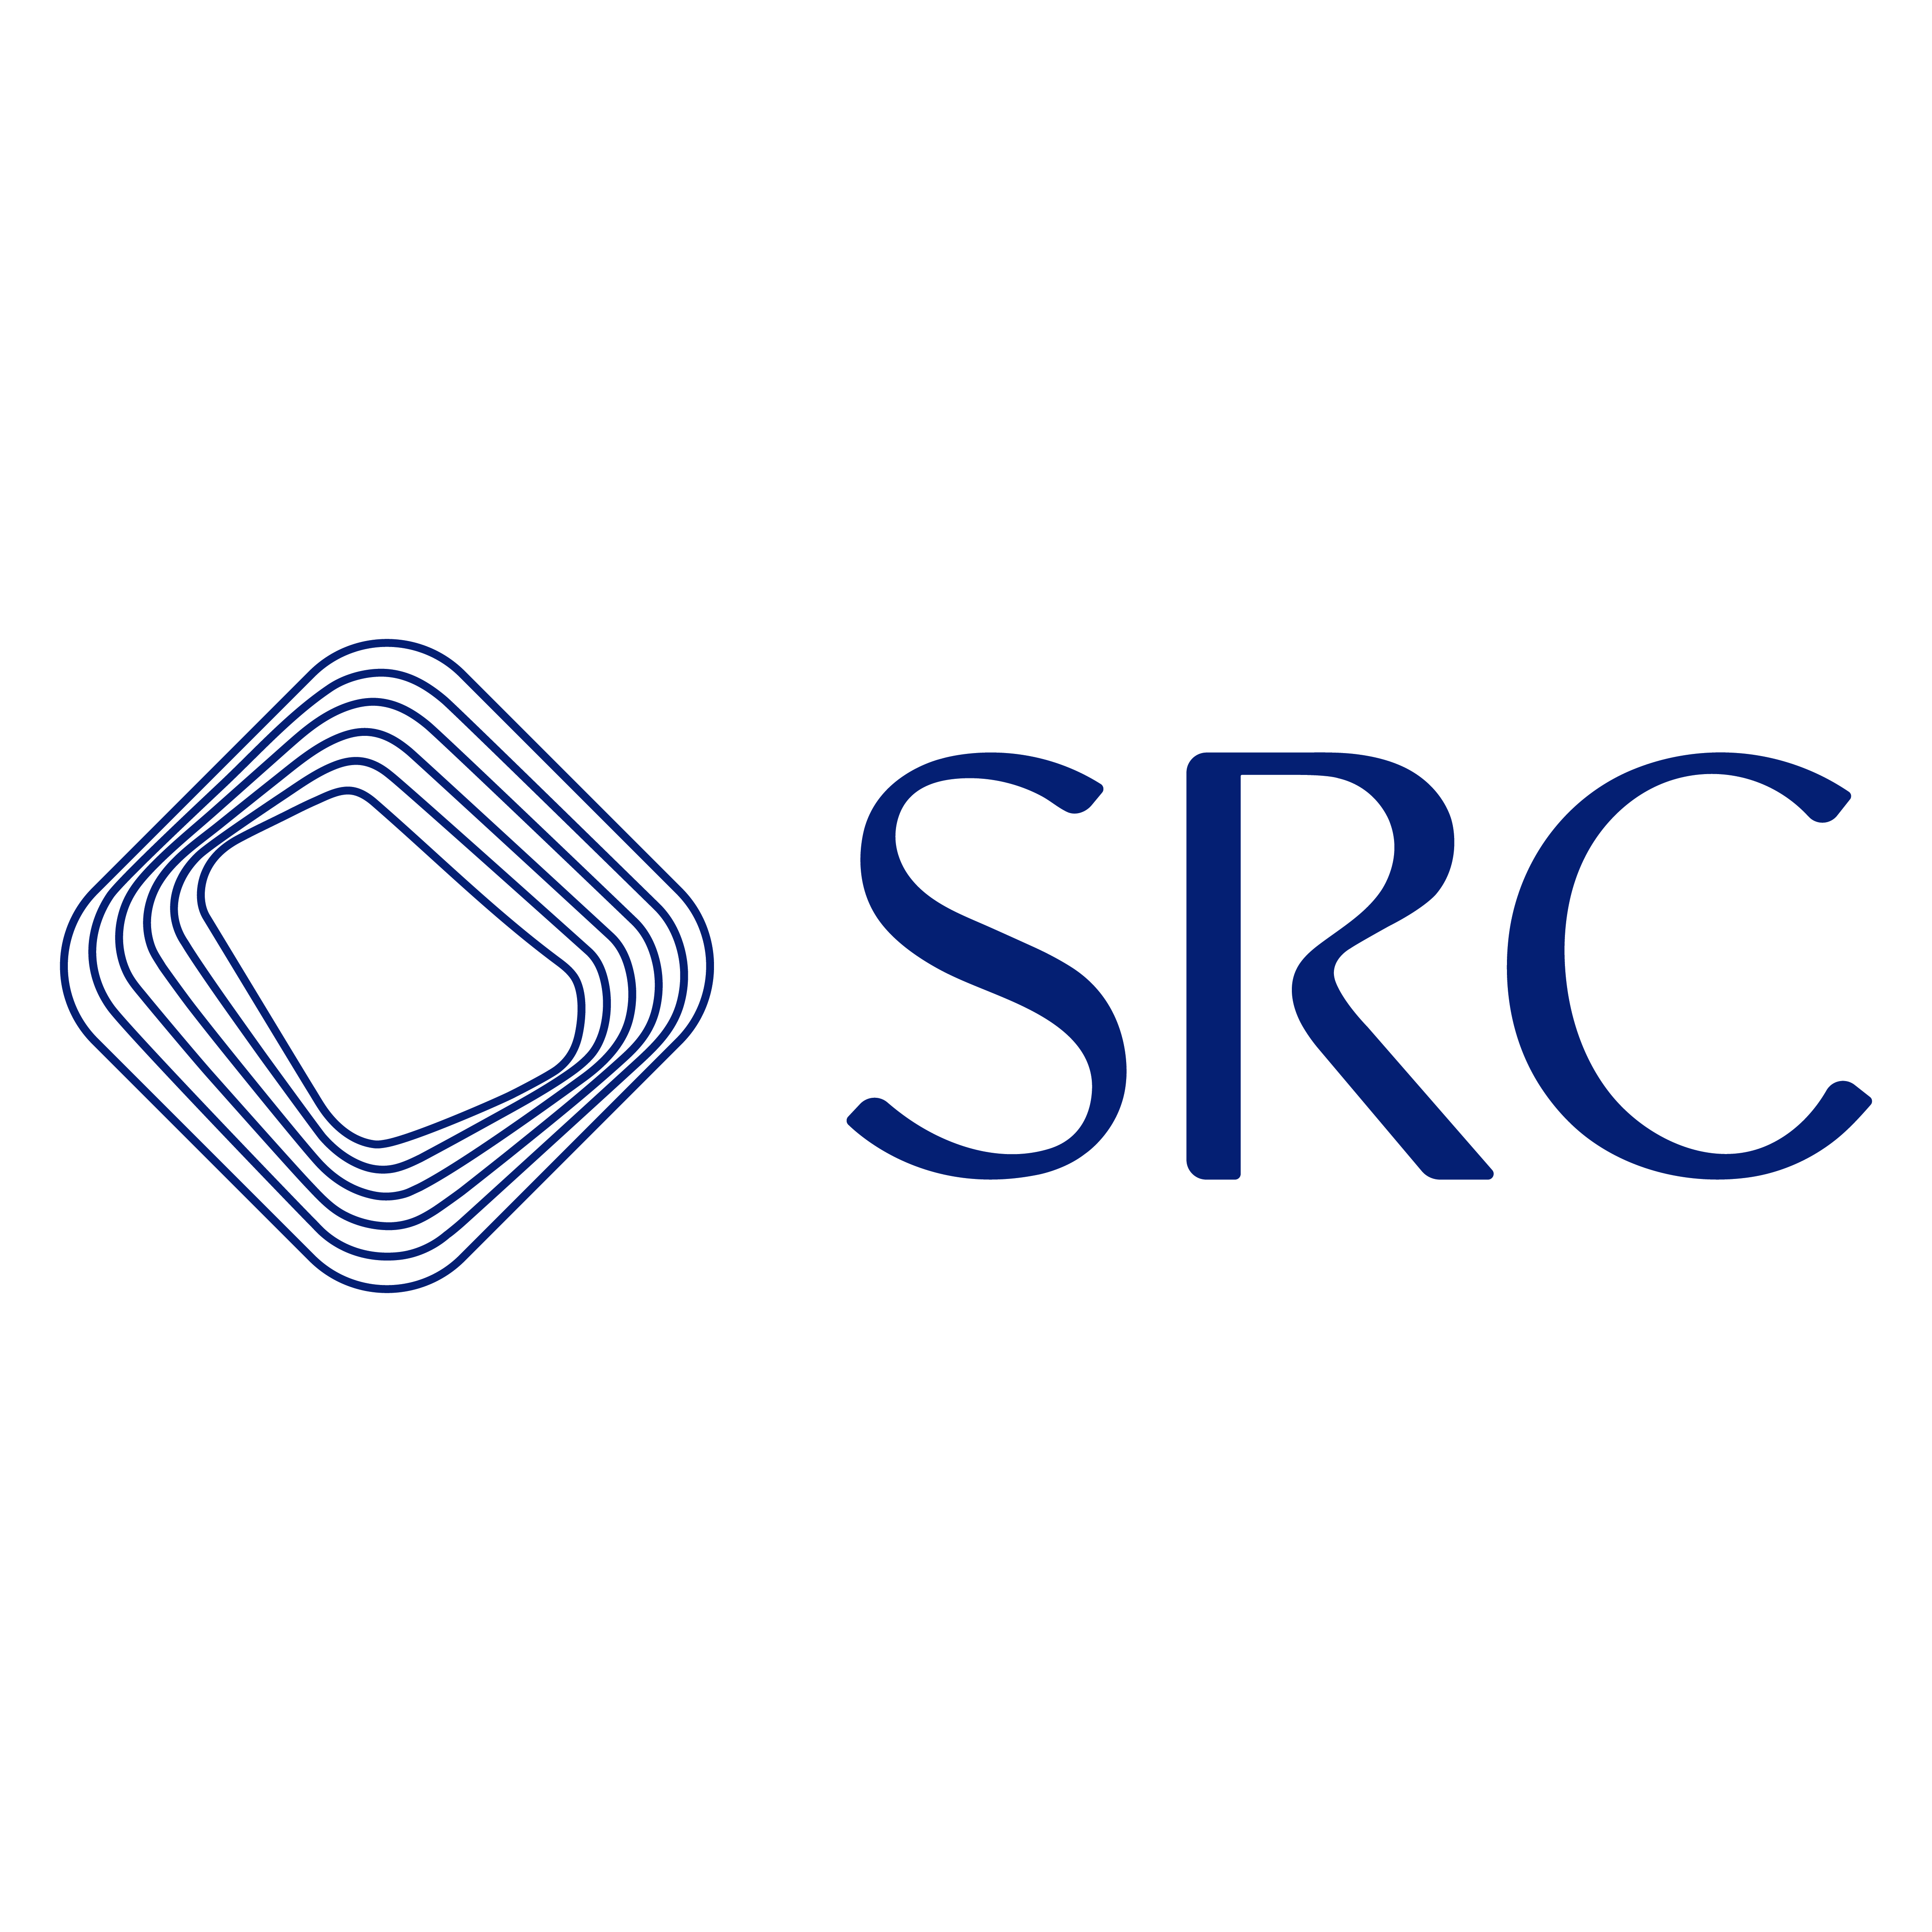 SRC announces credit rating and outlook assignment from S&P Global